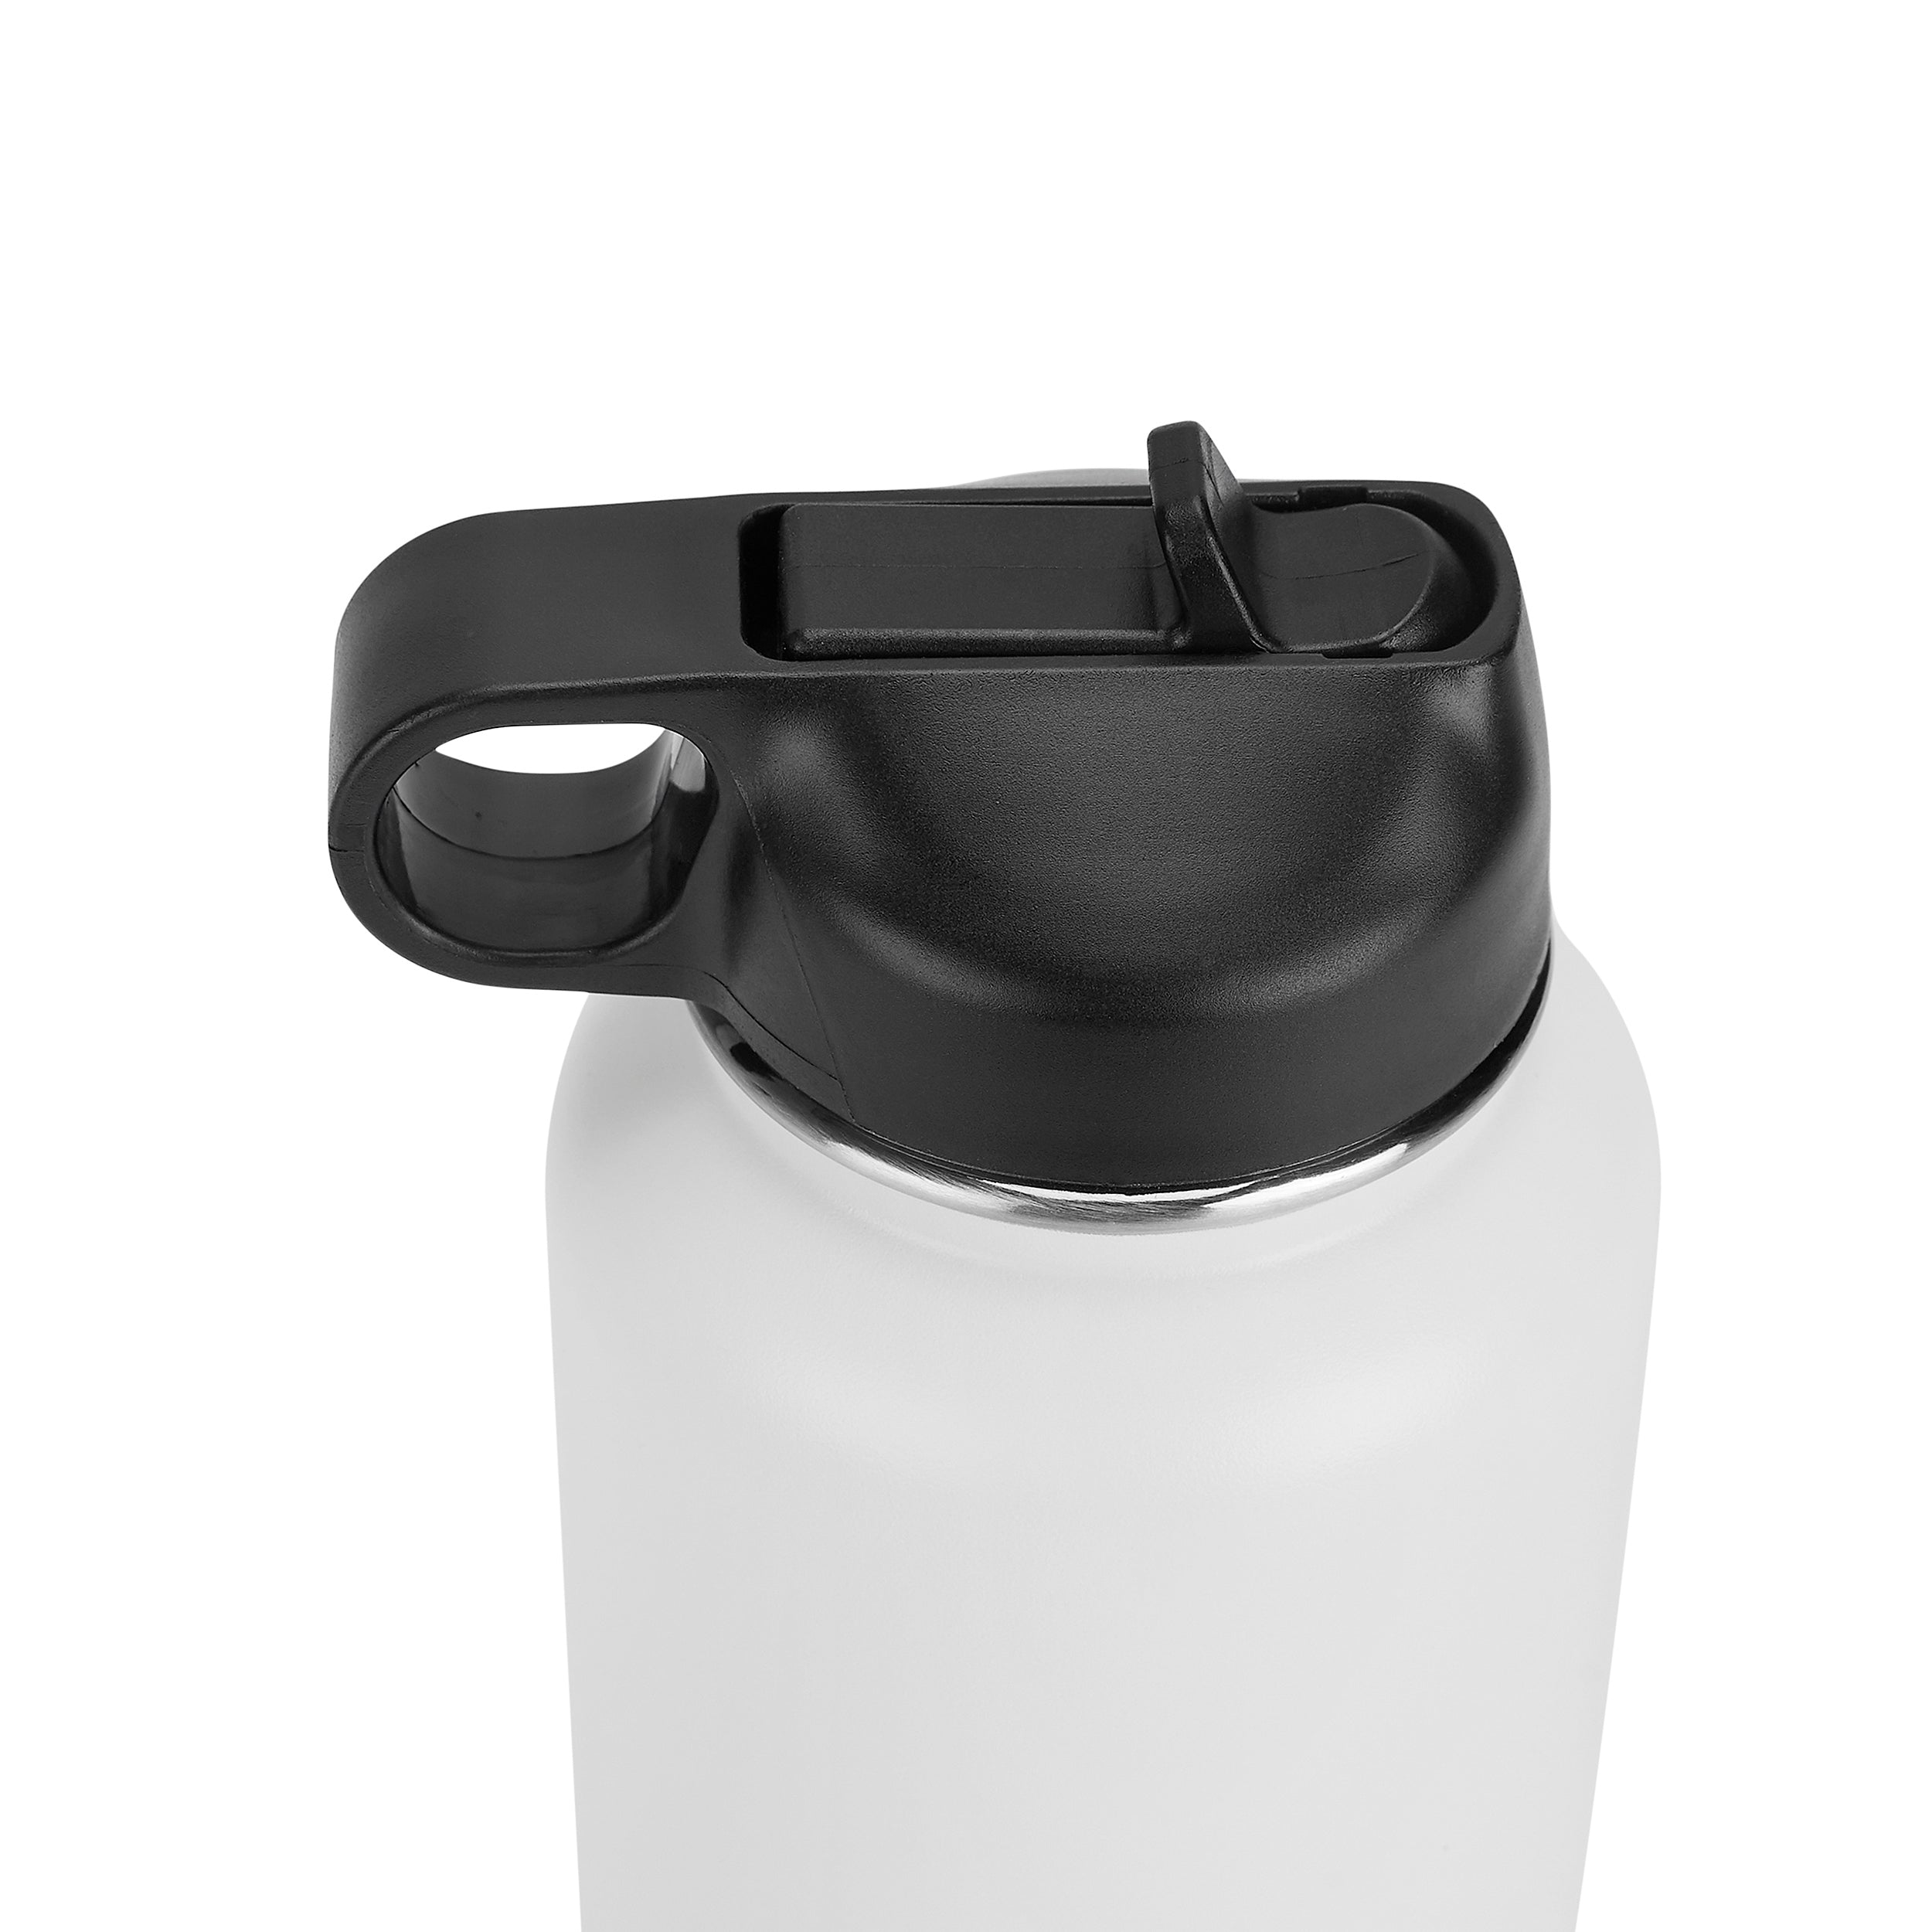 32oz Hydro Water Bottle For Surfers